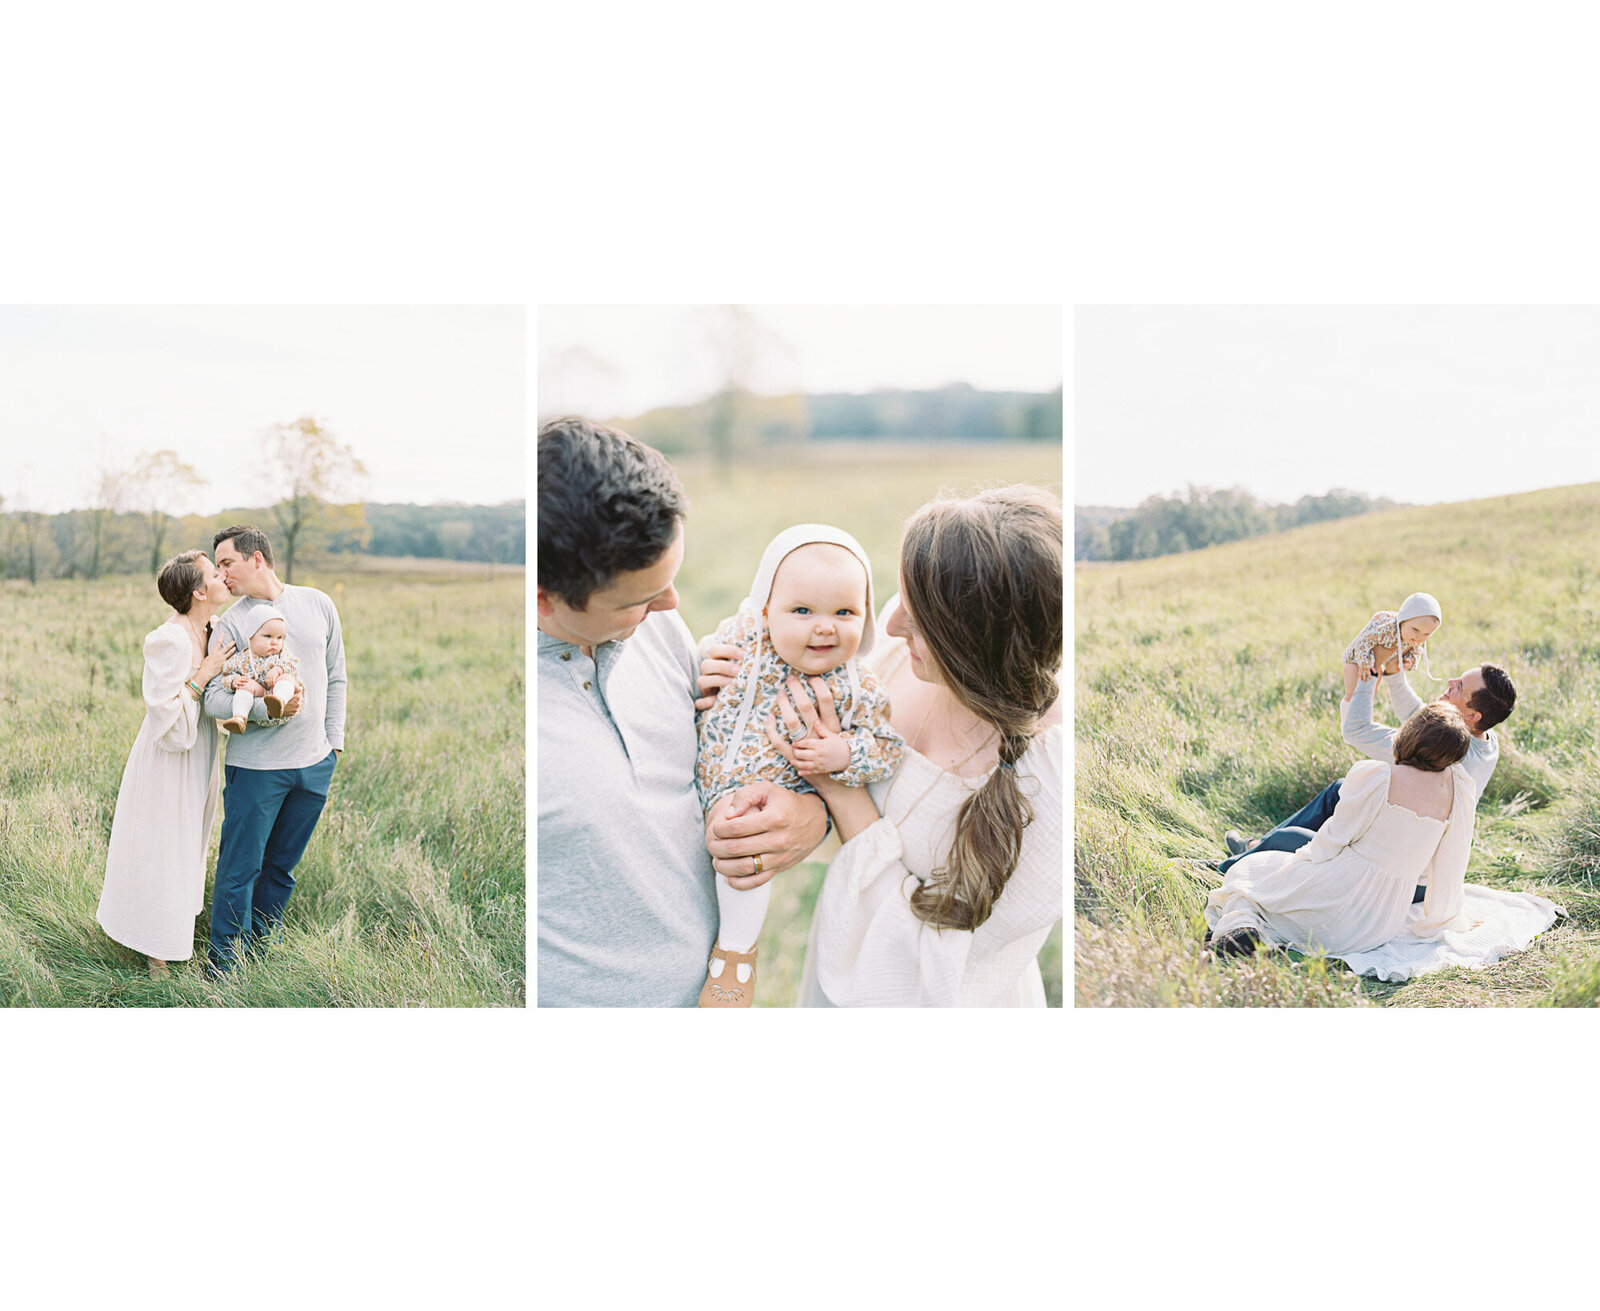 photo of a family with 9 month old baby in an idyllic outdoor field in fall by Madison wi family photographer, Talia Laird Photography